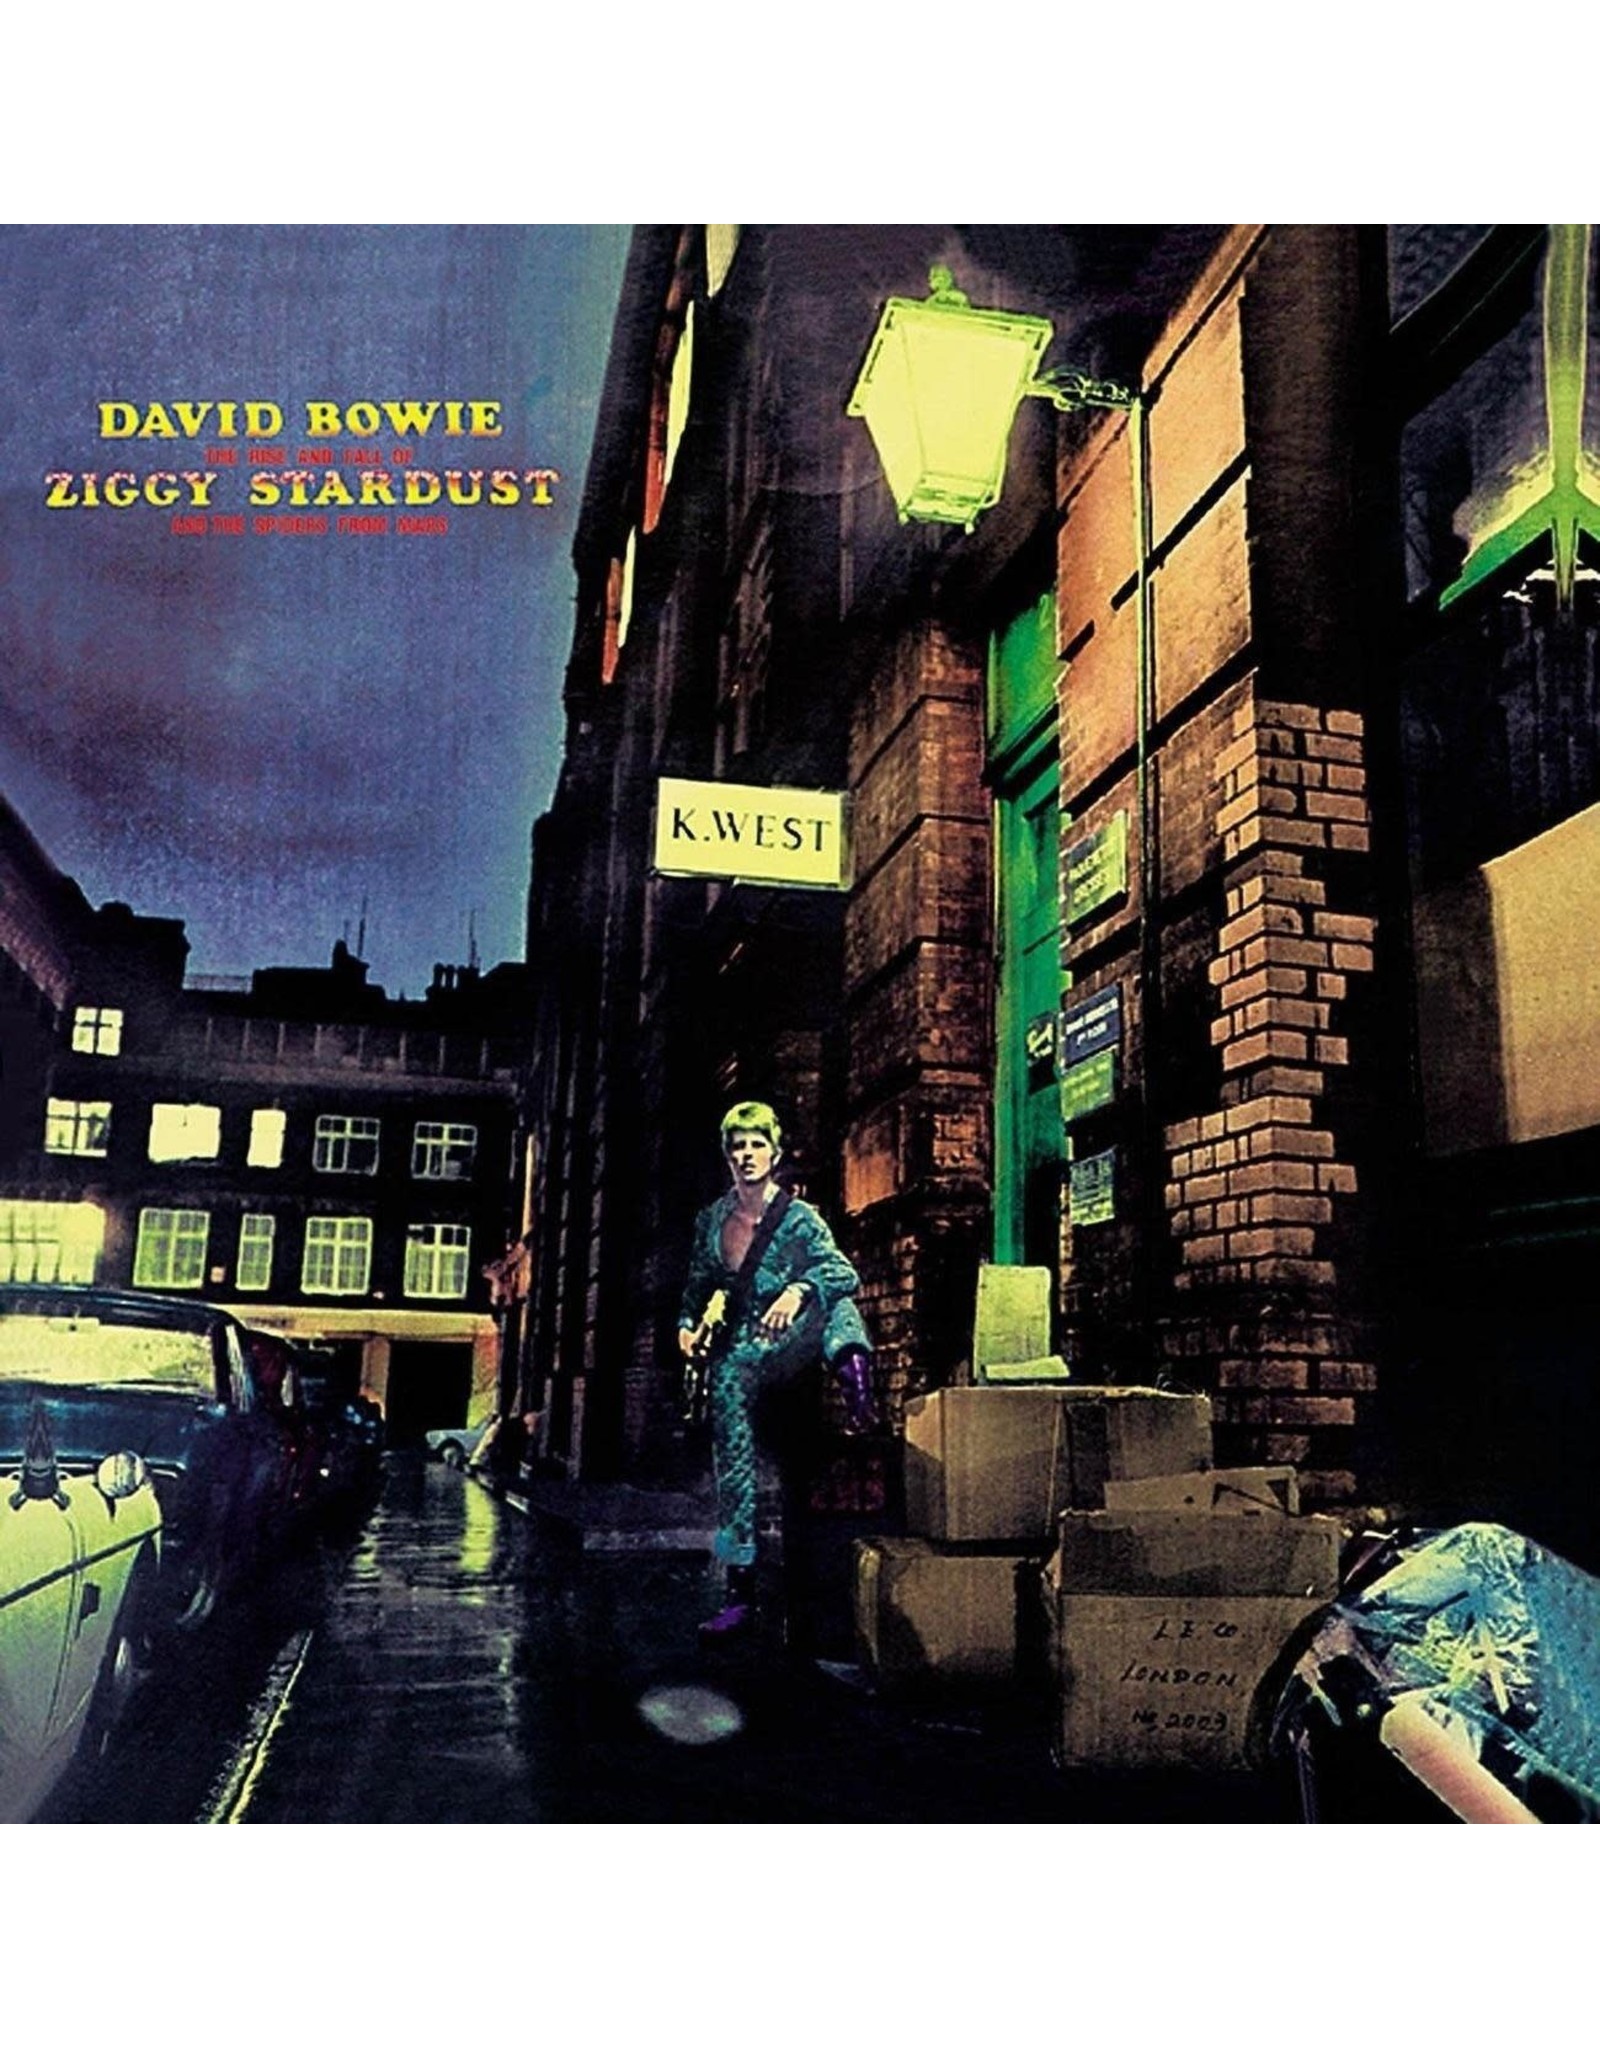 David Bowie - The Rise & Fall Of Ziggy Stardust & The Spiders From Mars [Half Speed Master]